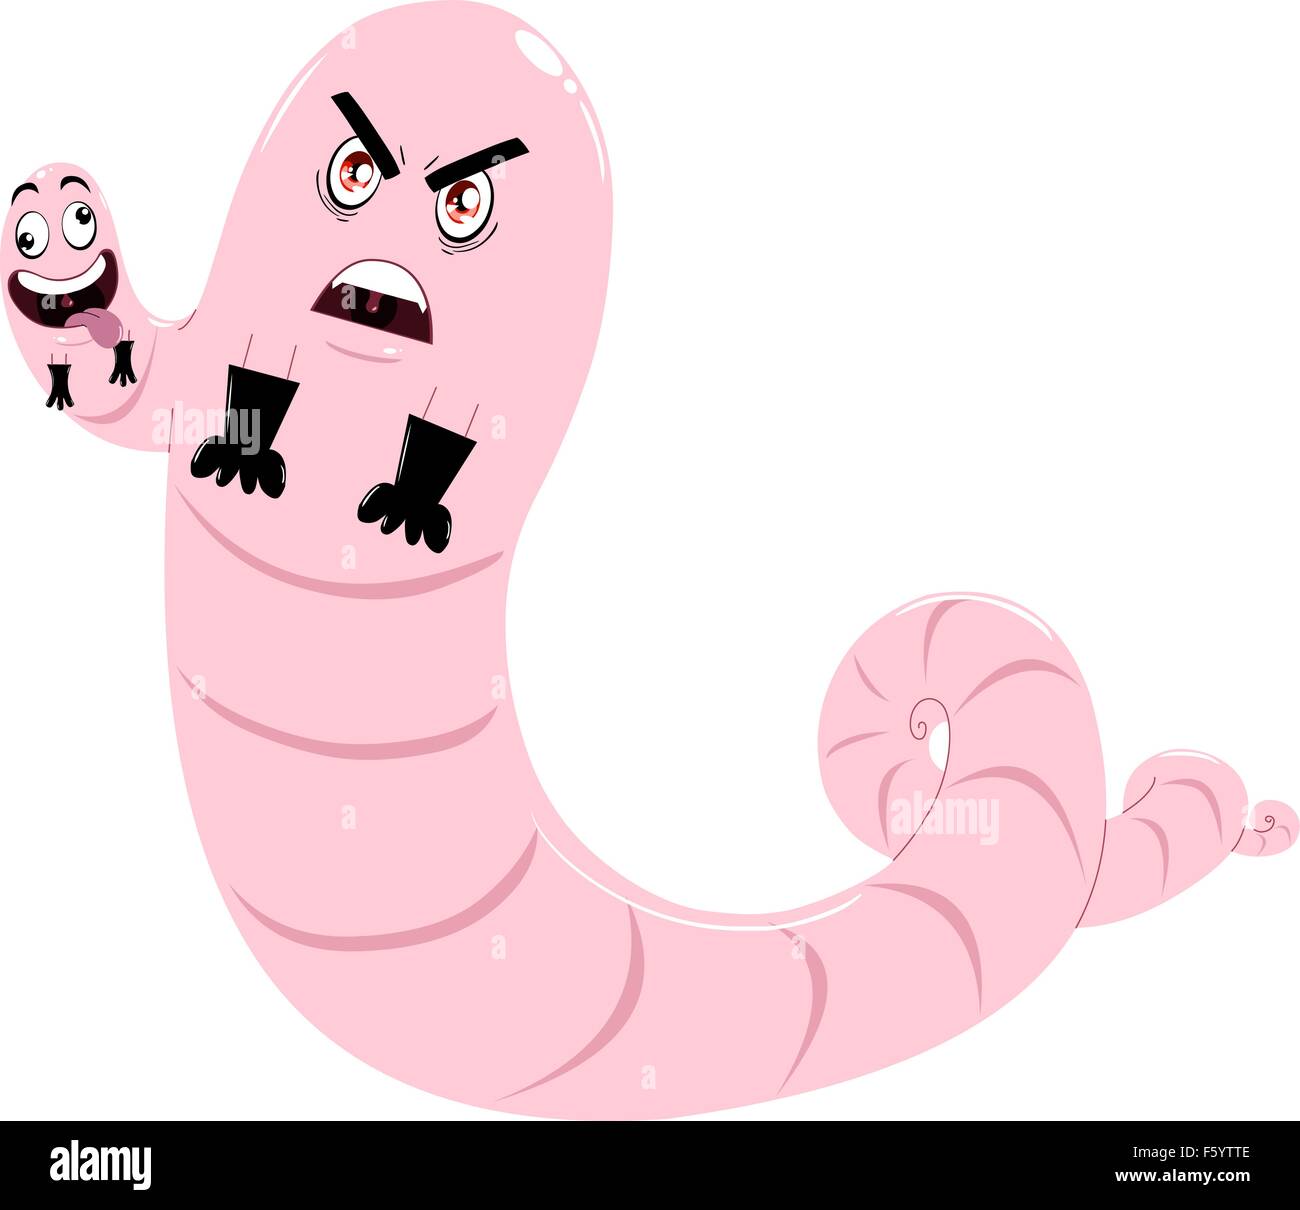 A vector illustration of a two headed evil worm wearing gloves. Stock Vector